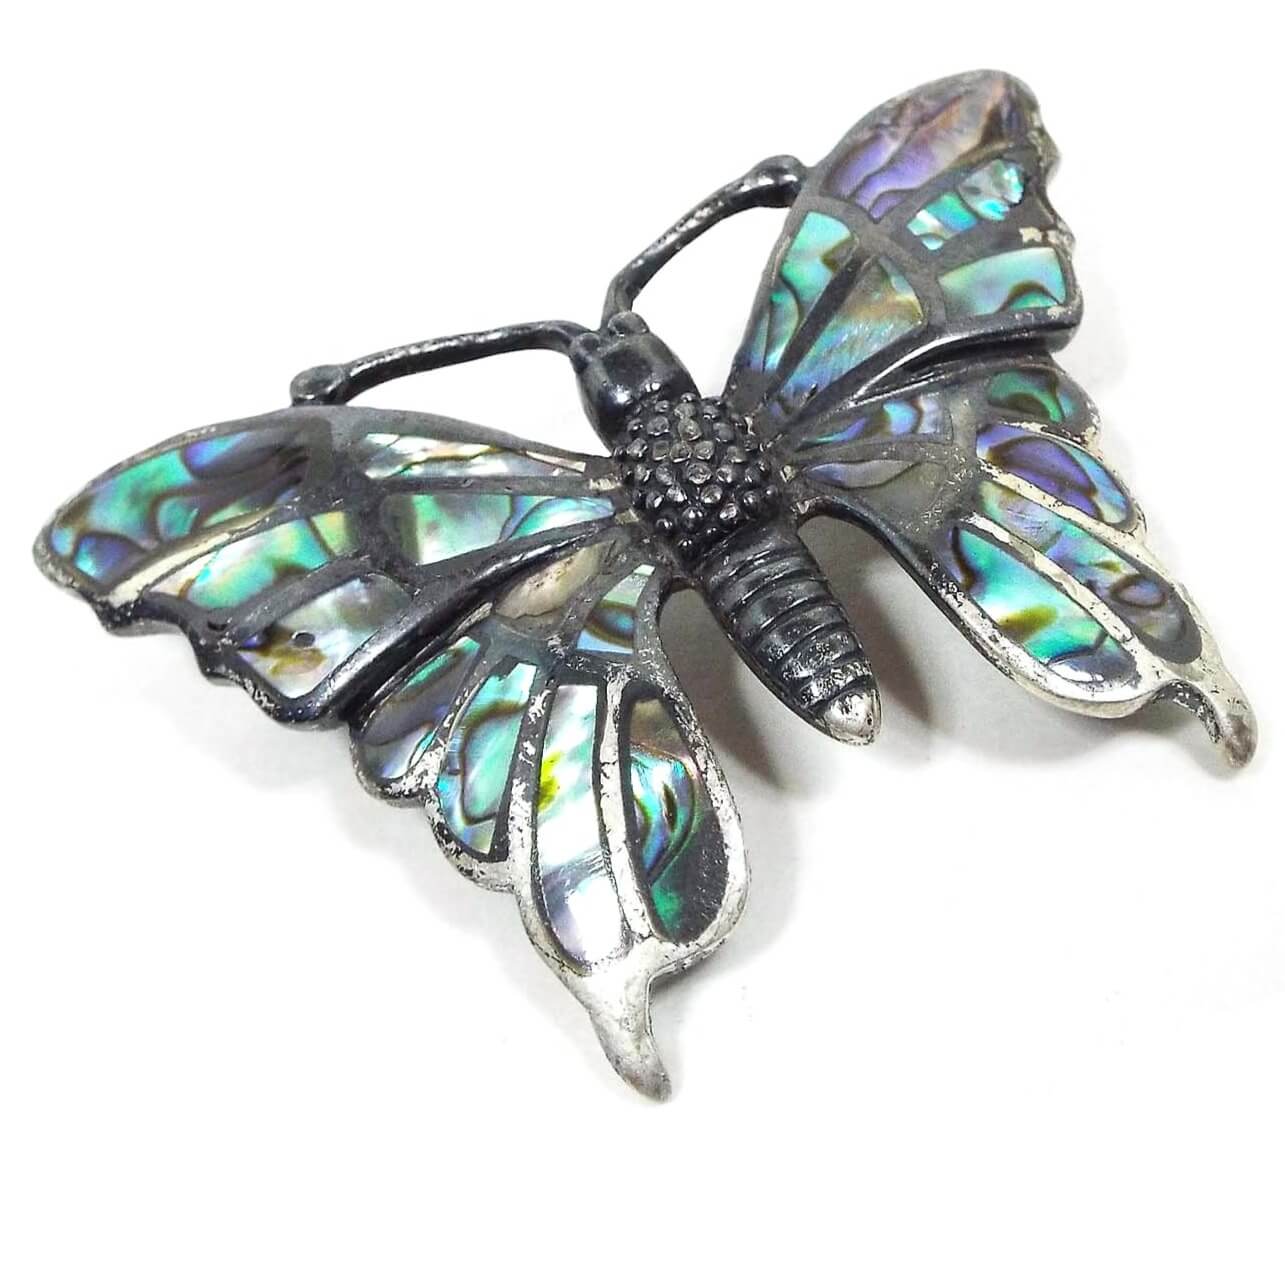 Front view of the retro vintage Southwestern Boho butterfly brooch pin. The sterling silver is very darkened in color to a really dark gray and black in some areas. The brooch is shaped like a butterfly with a textured body. The wings have areas on inlaid abalone shell that have various flashes of color as you move around in the light.